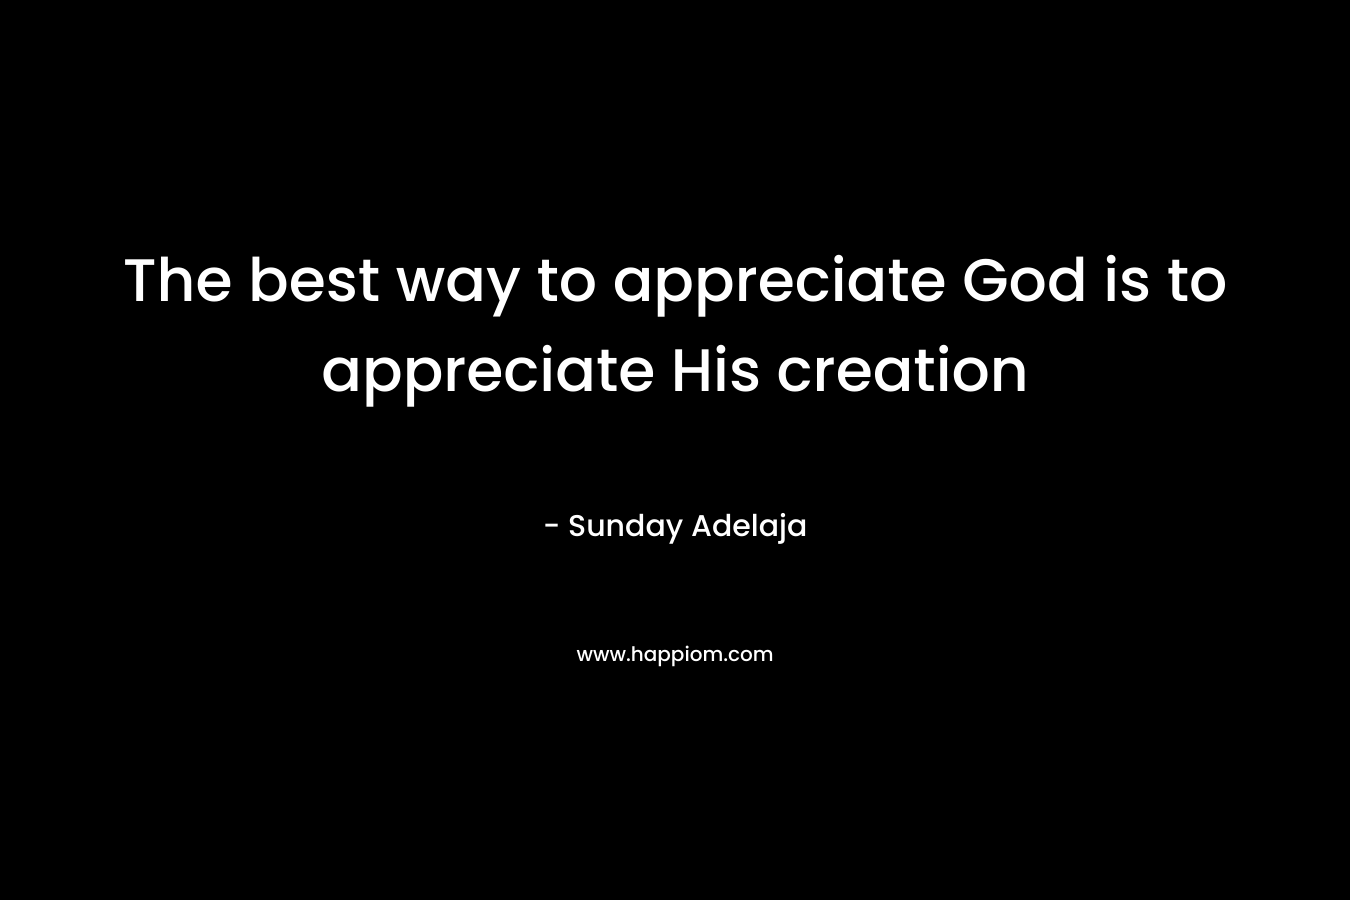 The best way to appreciate God is to appreciate His creation